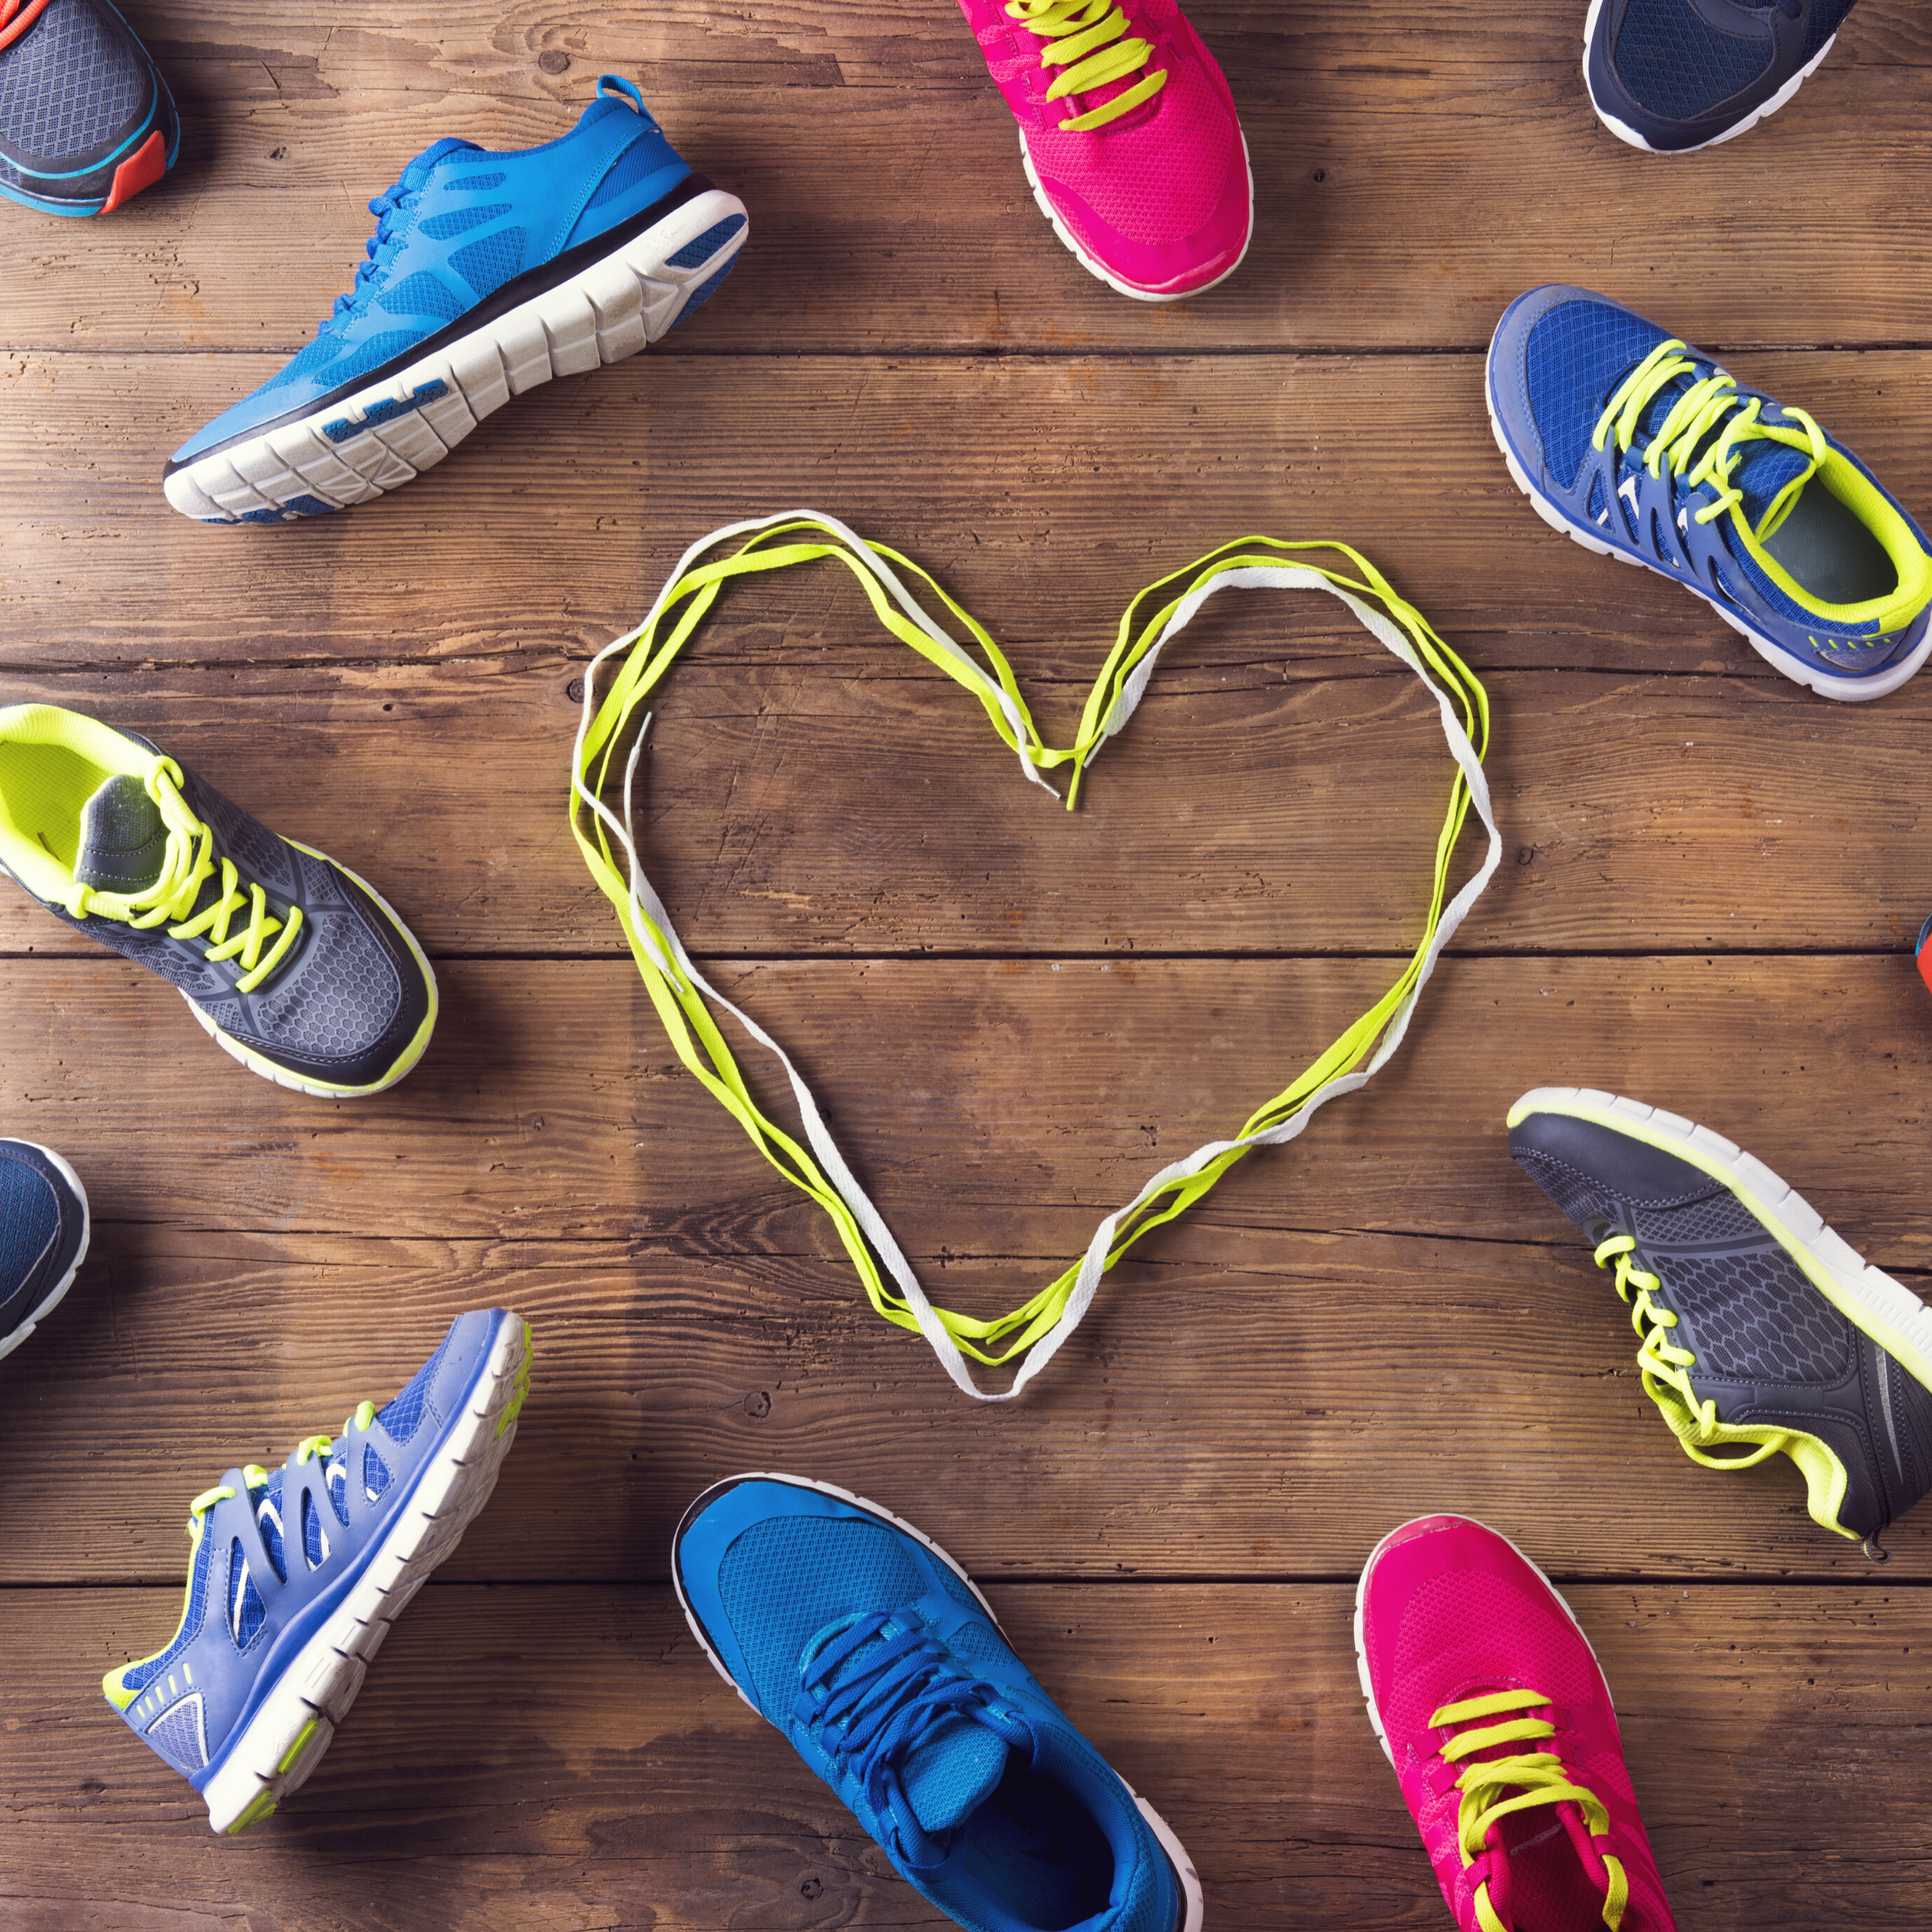 Sneakers on floor with heart in the center made of laces depicting Sports Nutrition